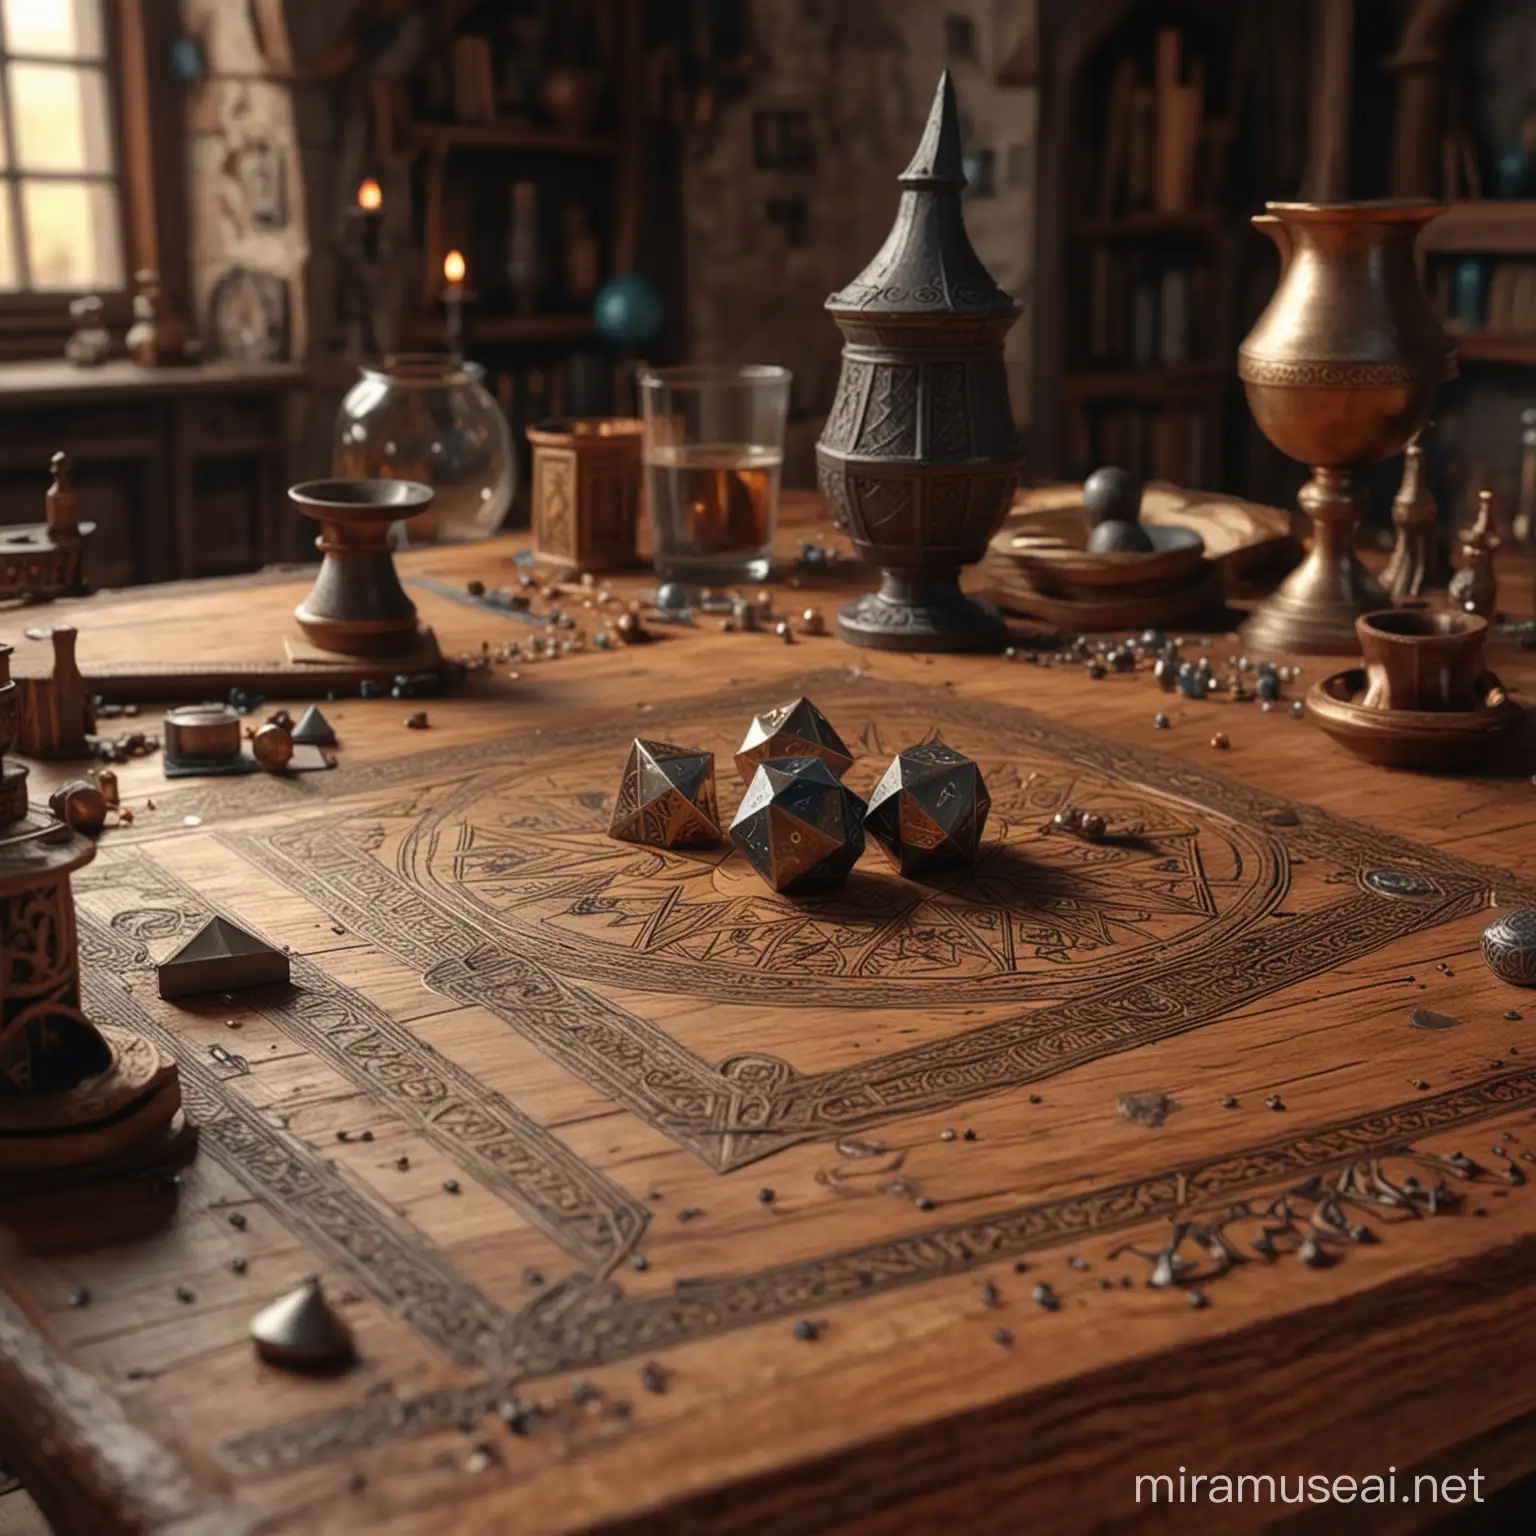 Fourth Dimensional Geometric Illusions on a Medieval Wizards Table